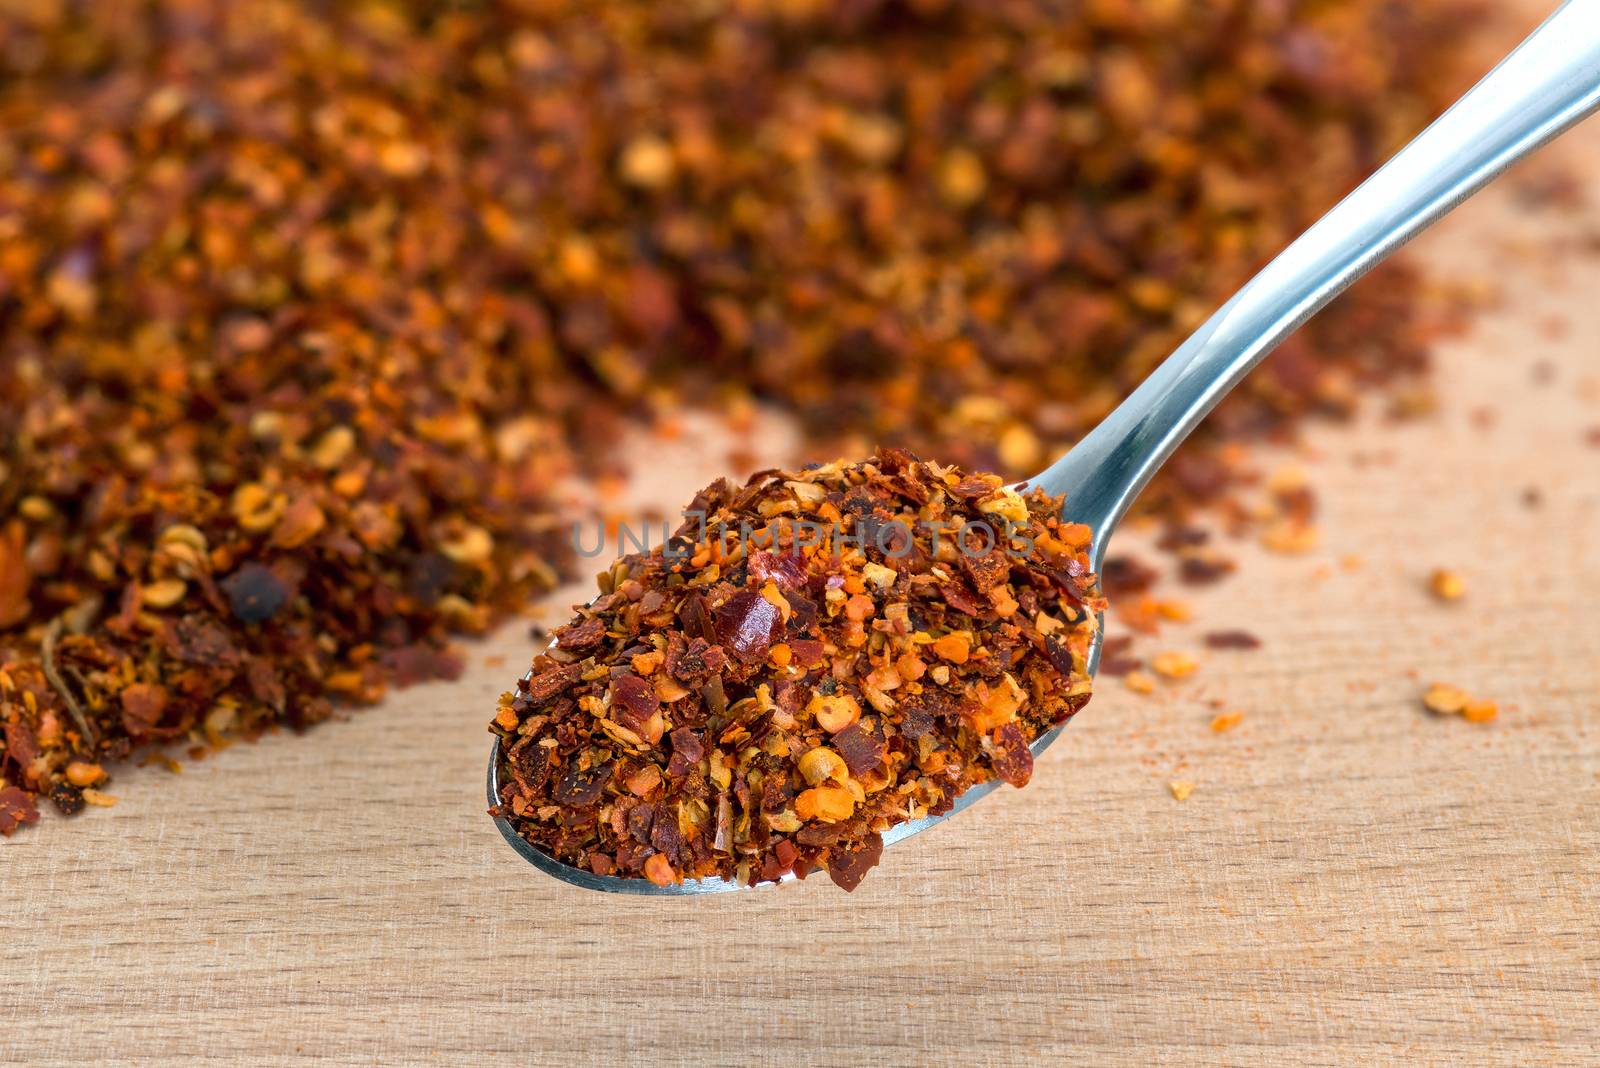 Organic hot red chili flakes made from organically grown whole red chillies on cutting board background